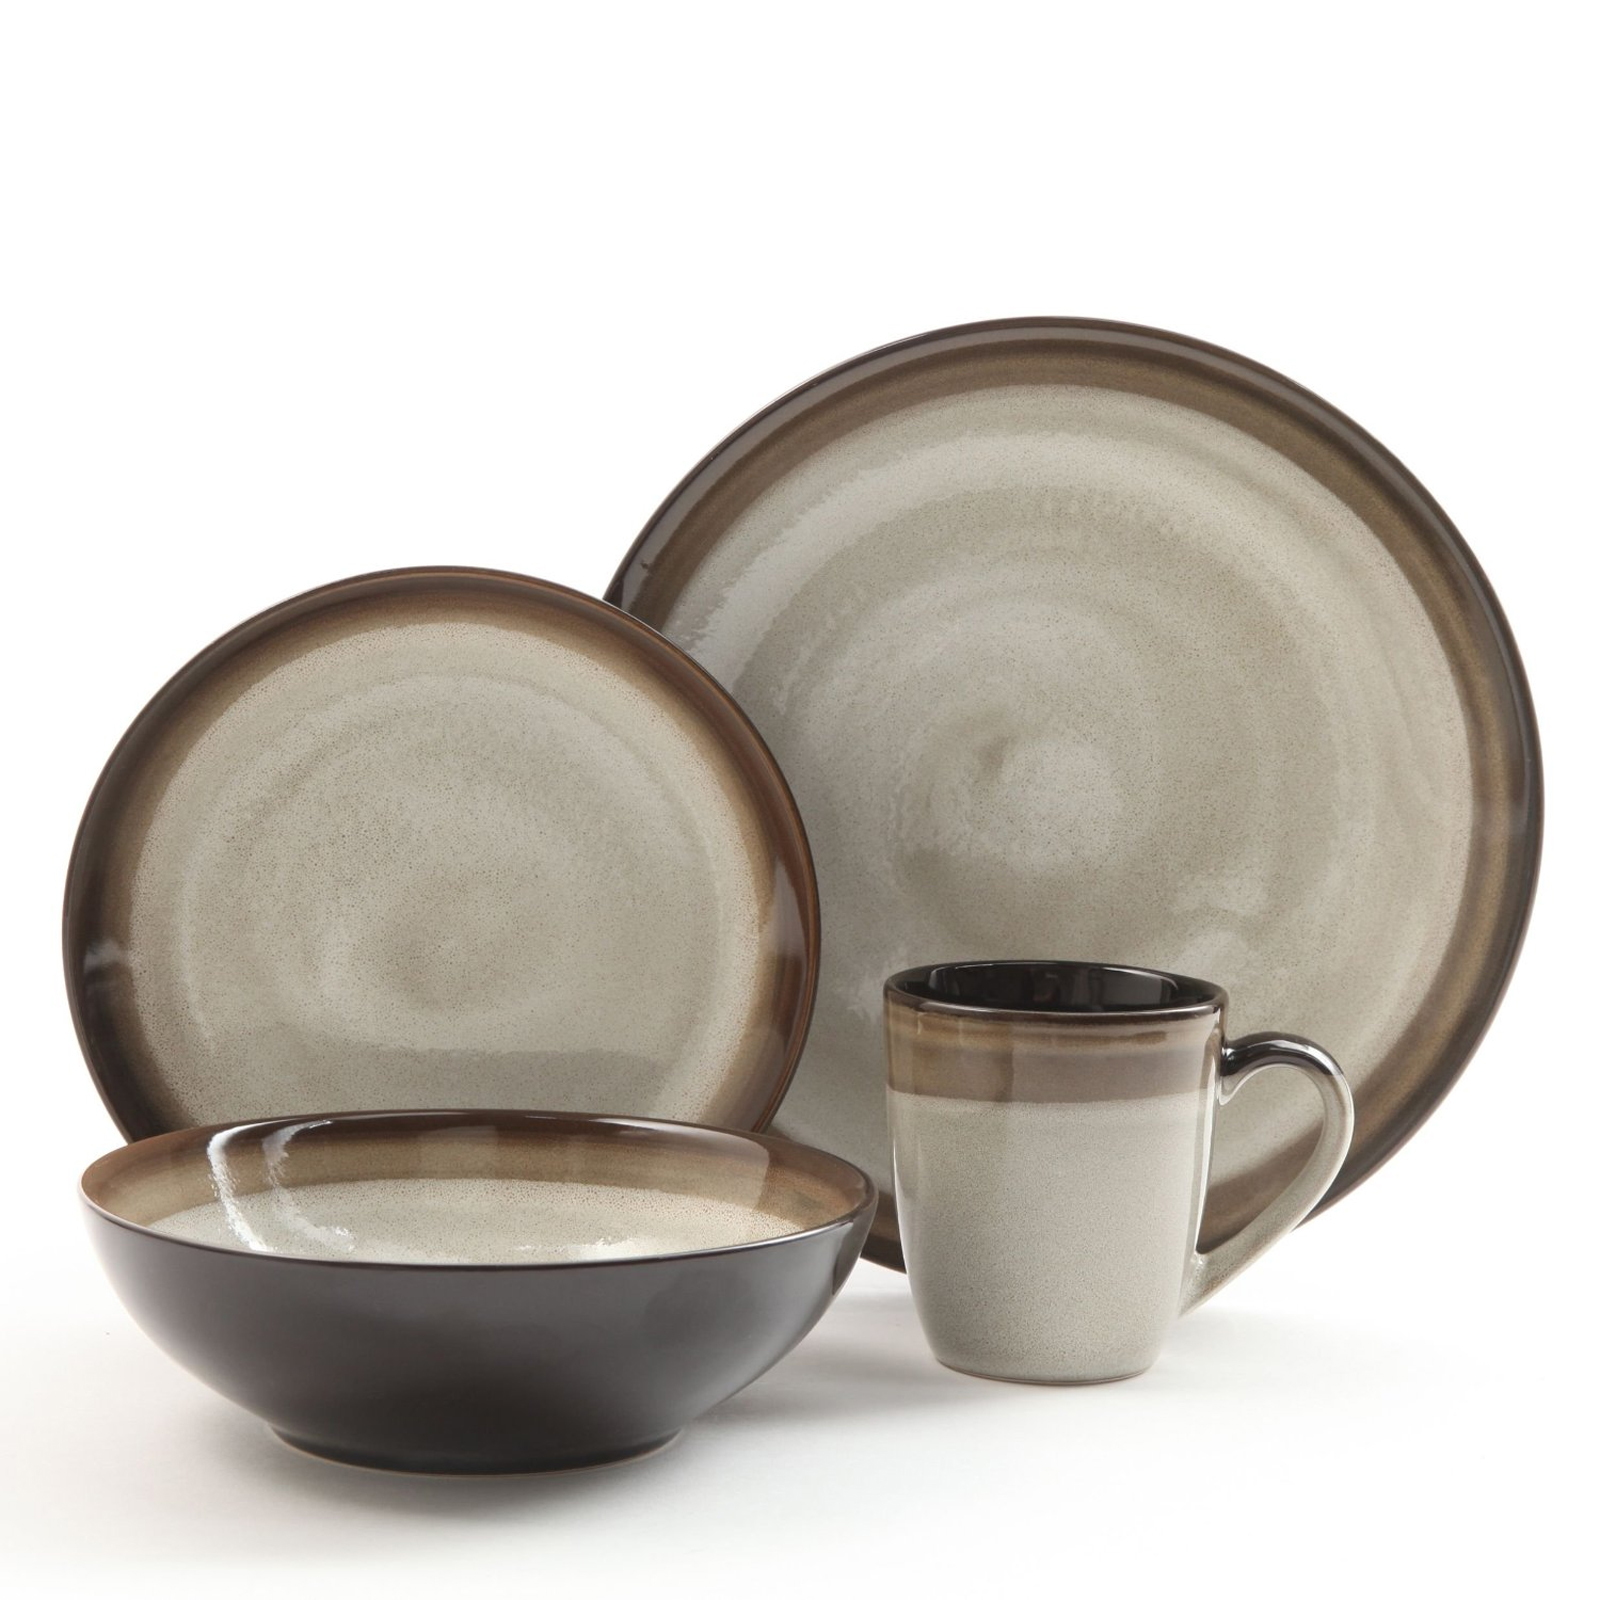 Gibson Couture Bands 16 Piece Dinnerware Set- Cream with ...